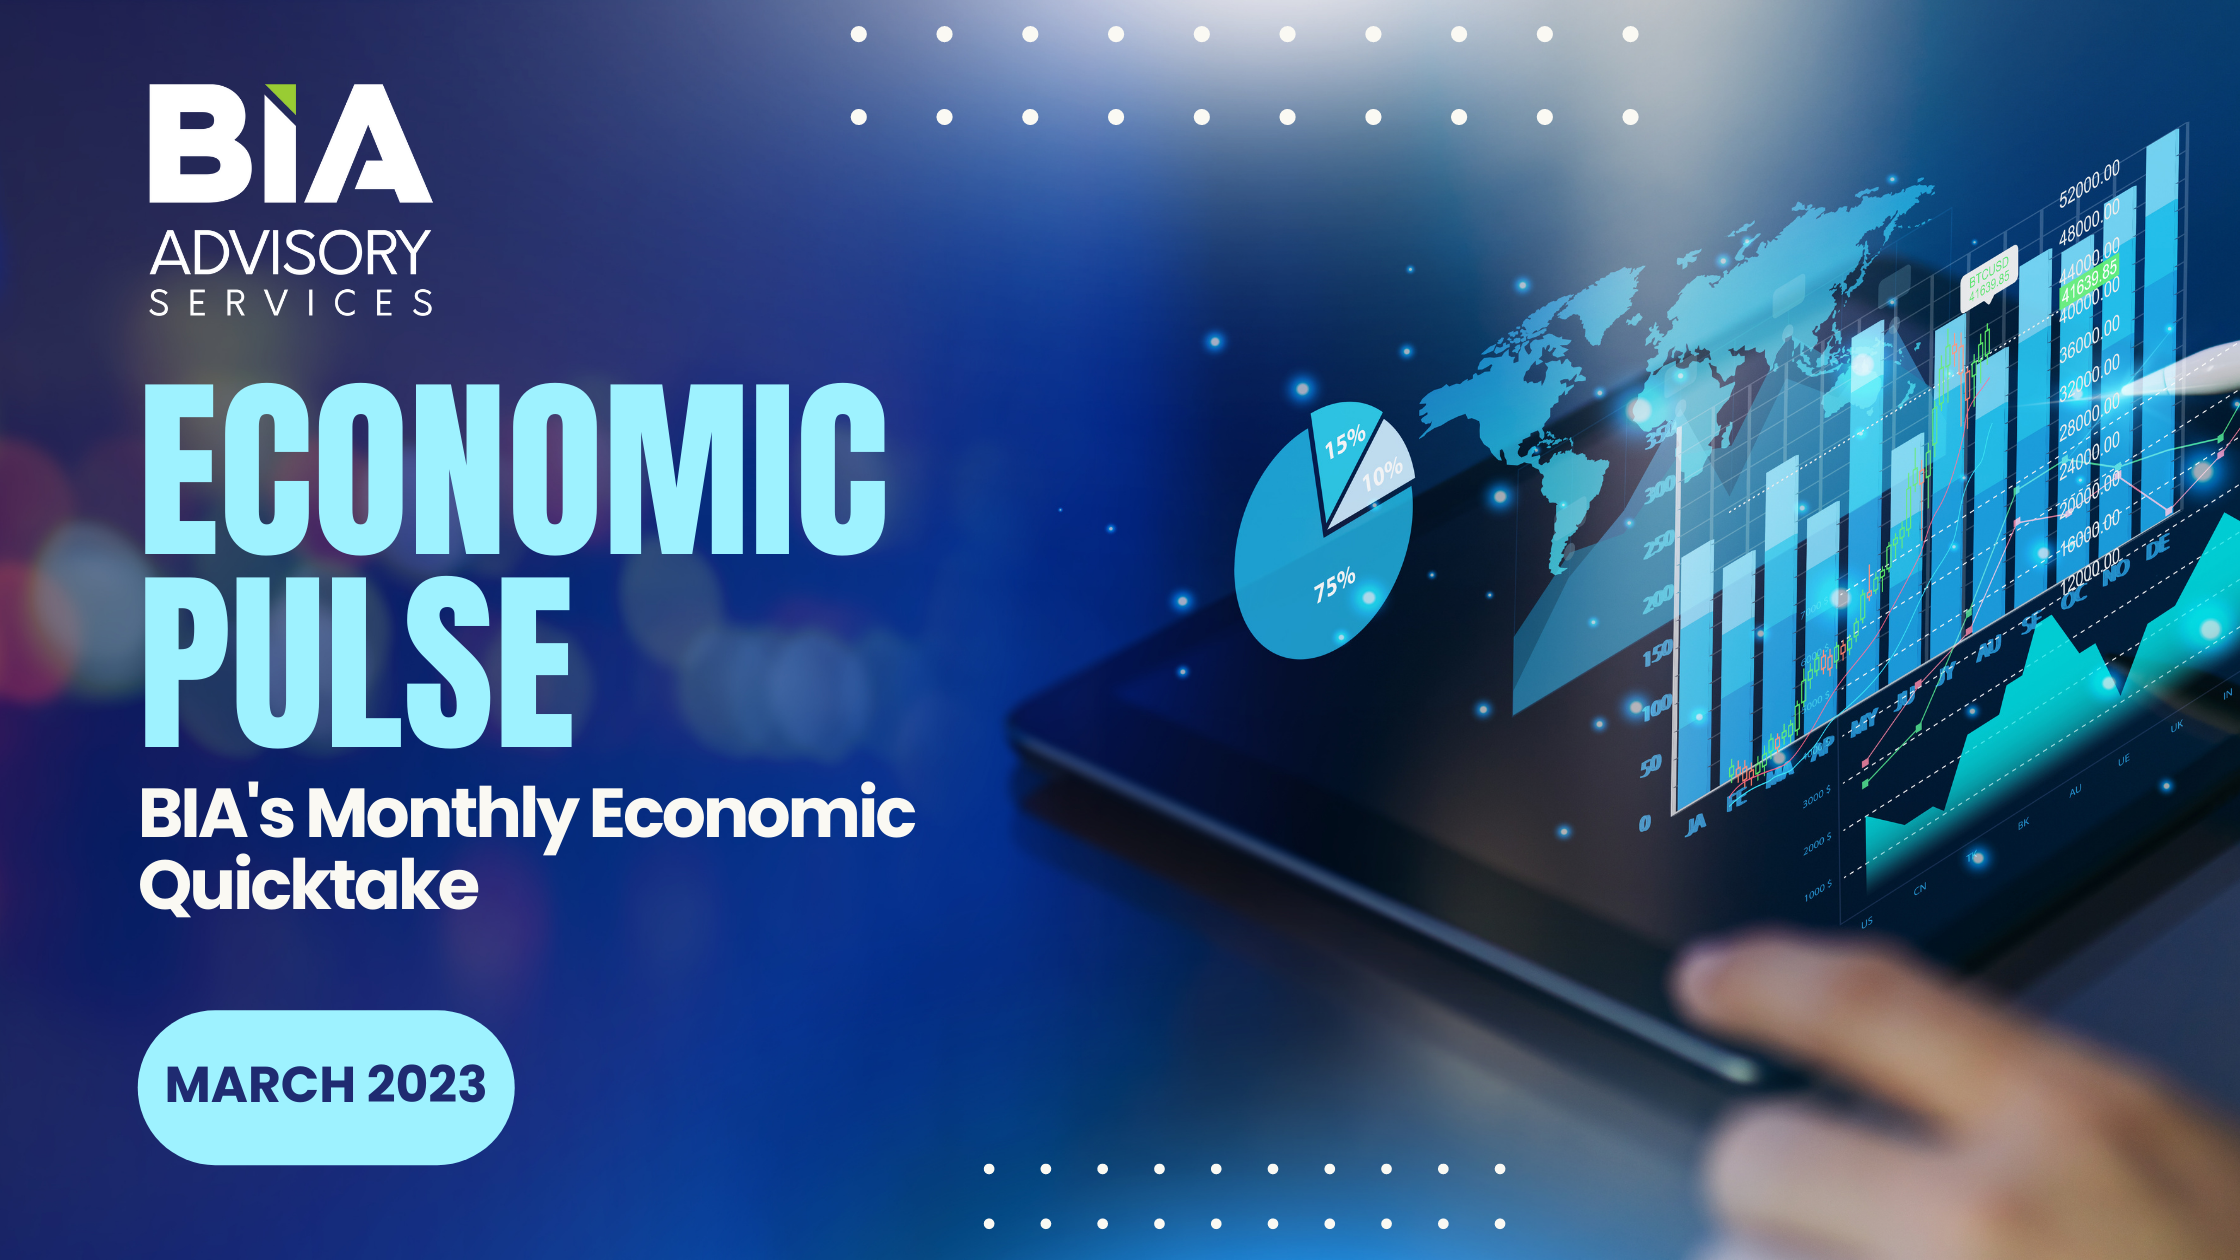 Economic Pulse: BIA’s Monthly Quick Take For March 2023